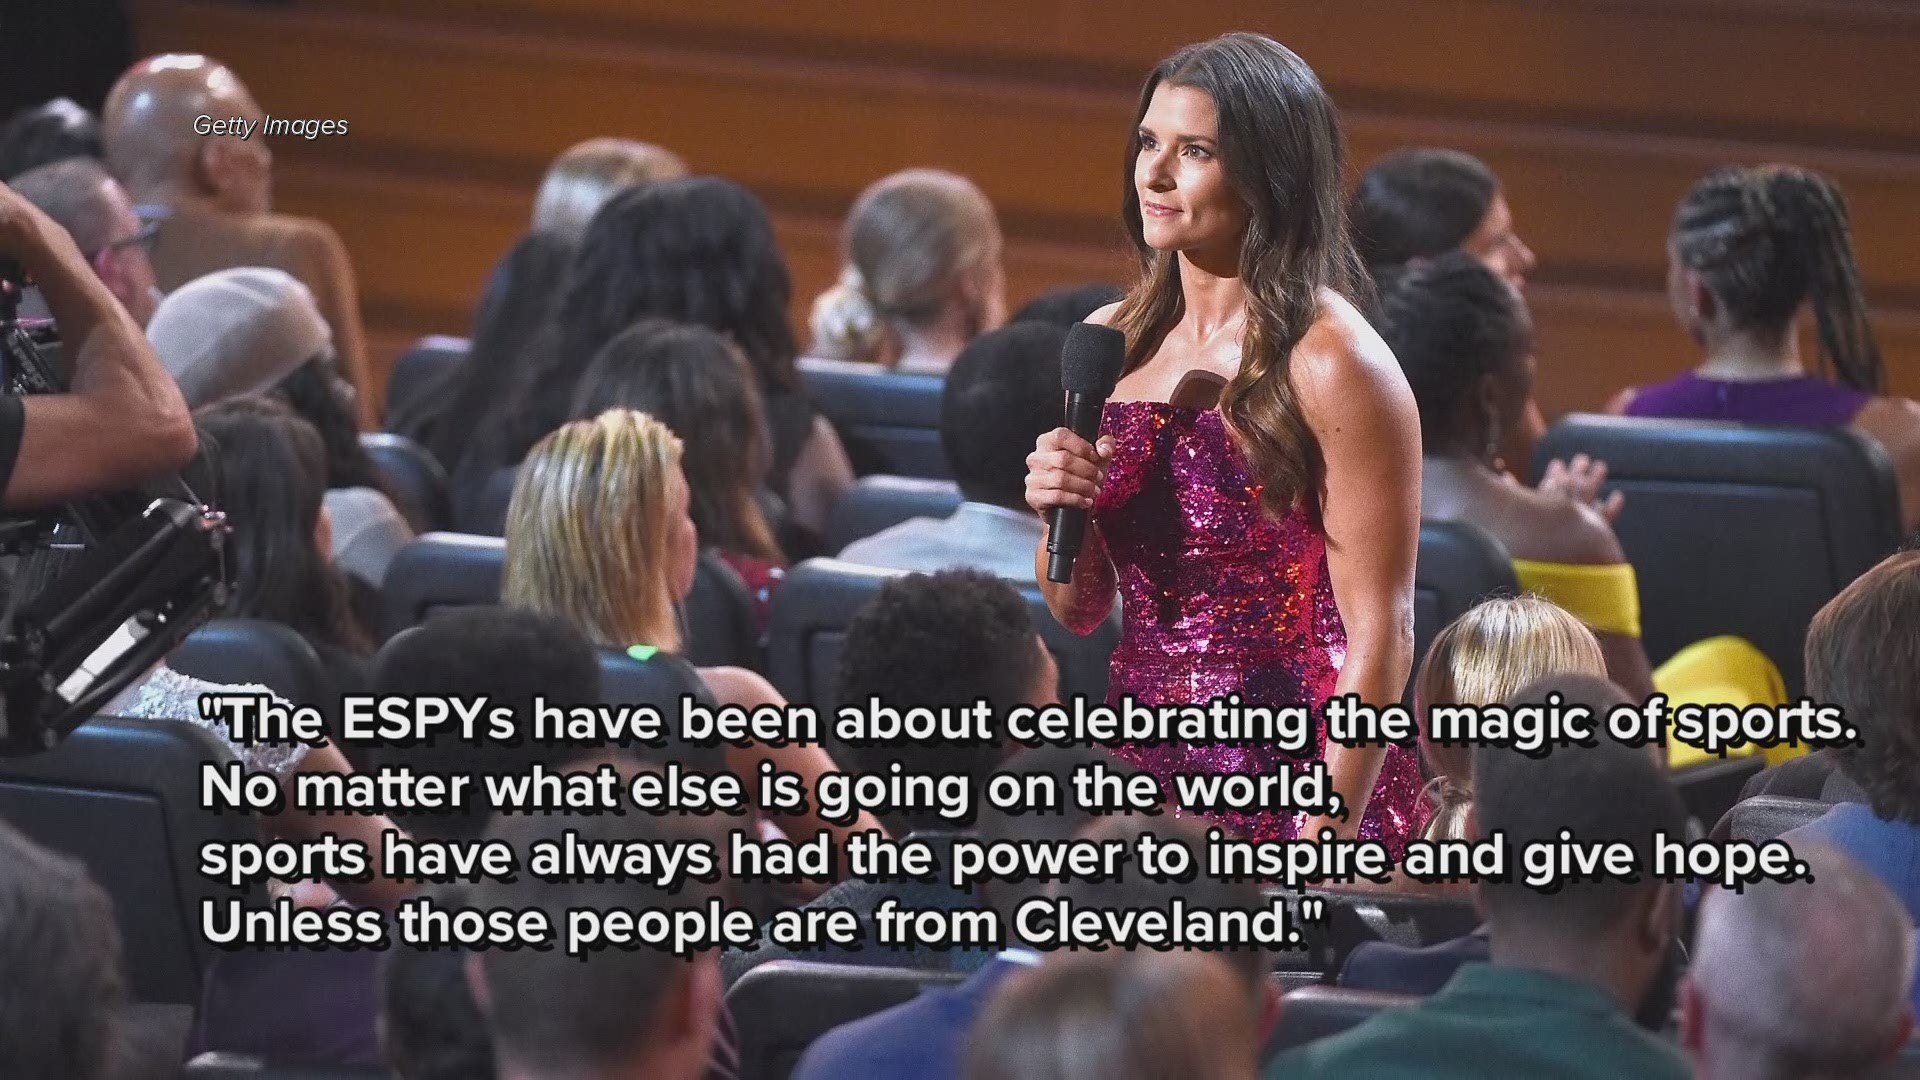 Danica Patrick takes cheap shot at Cleveland in ESPYs monologue